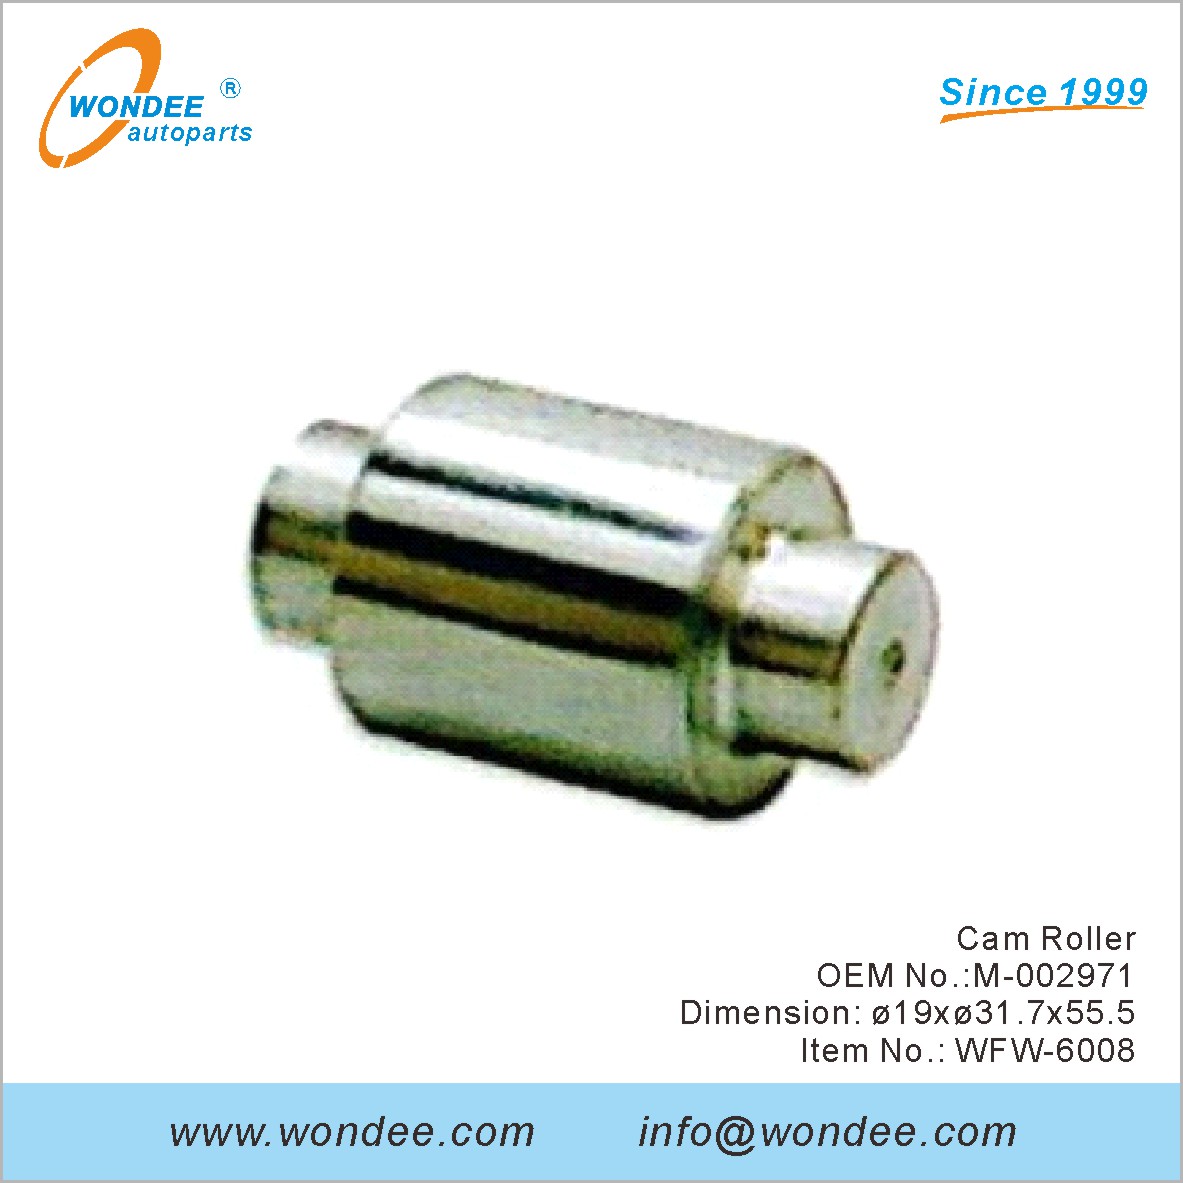 Cam Roller OEM M-002971for FUWA from WONDEE